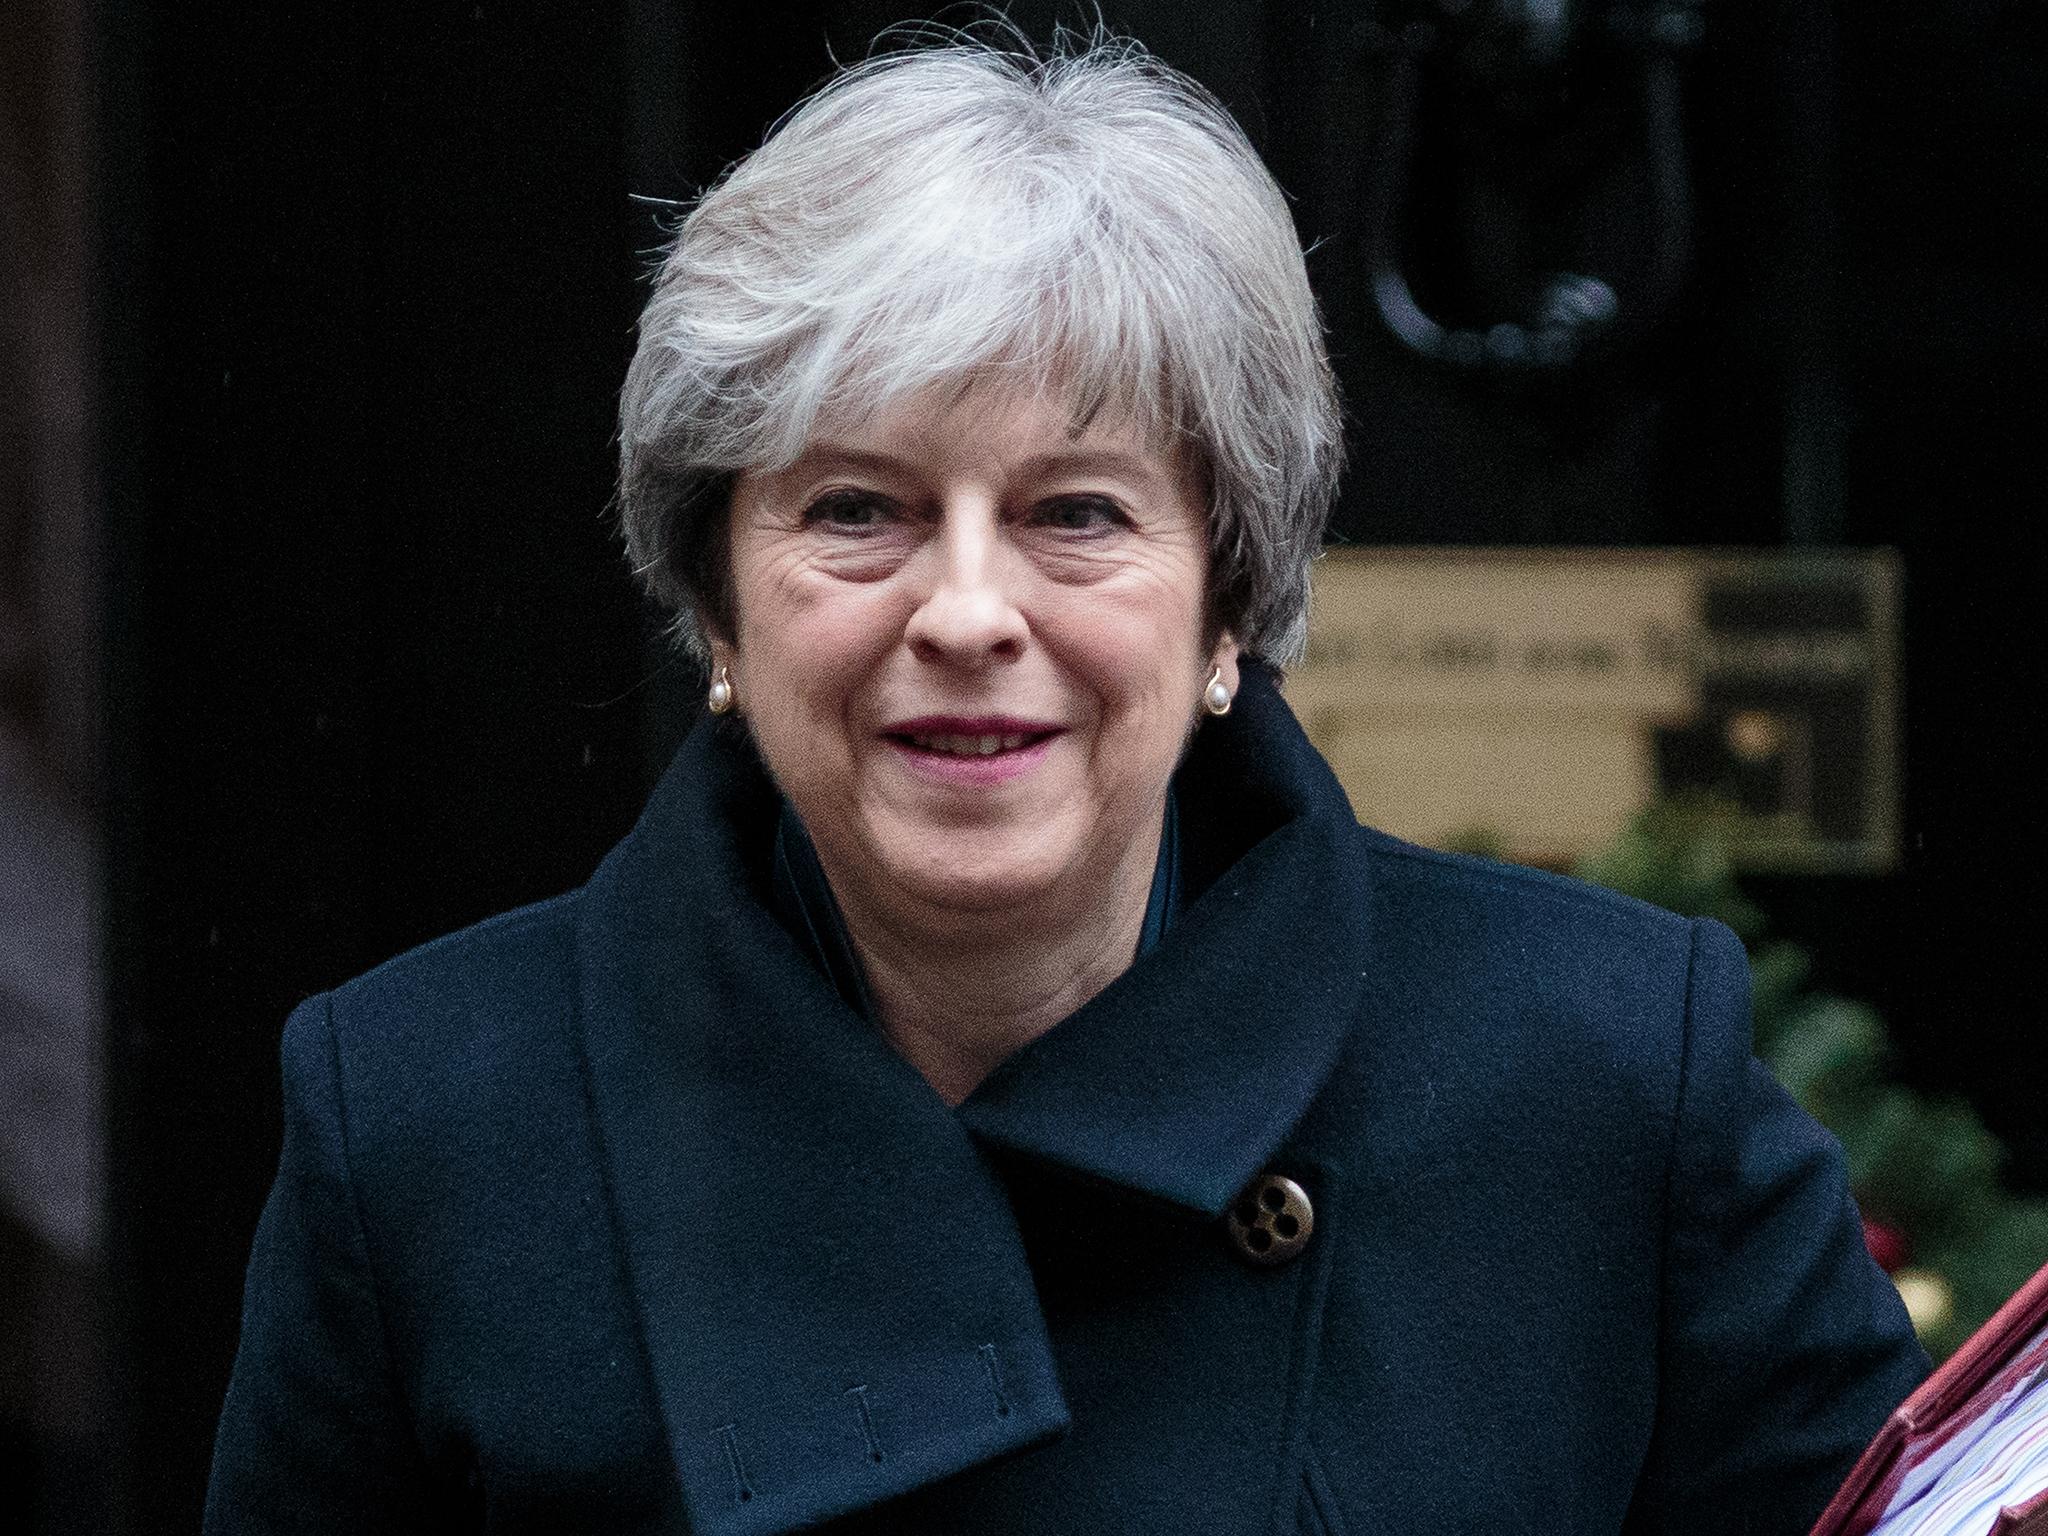 The Prime Minister claims she has proved her doubters wrong